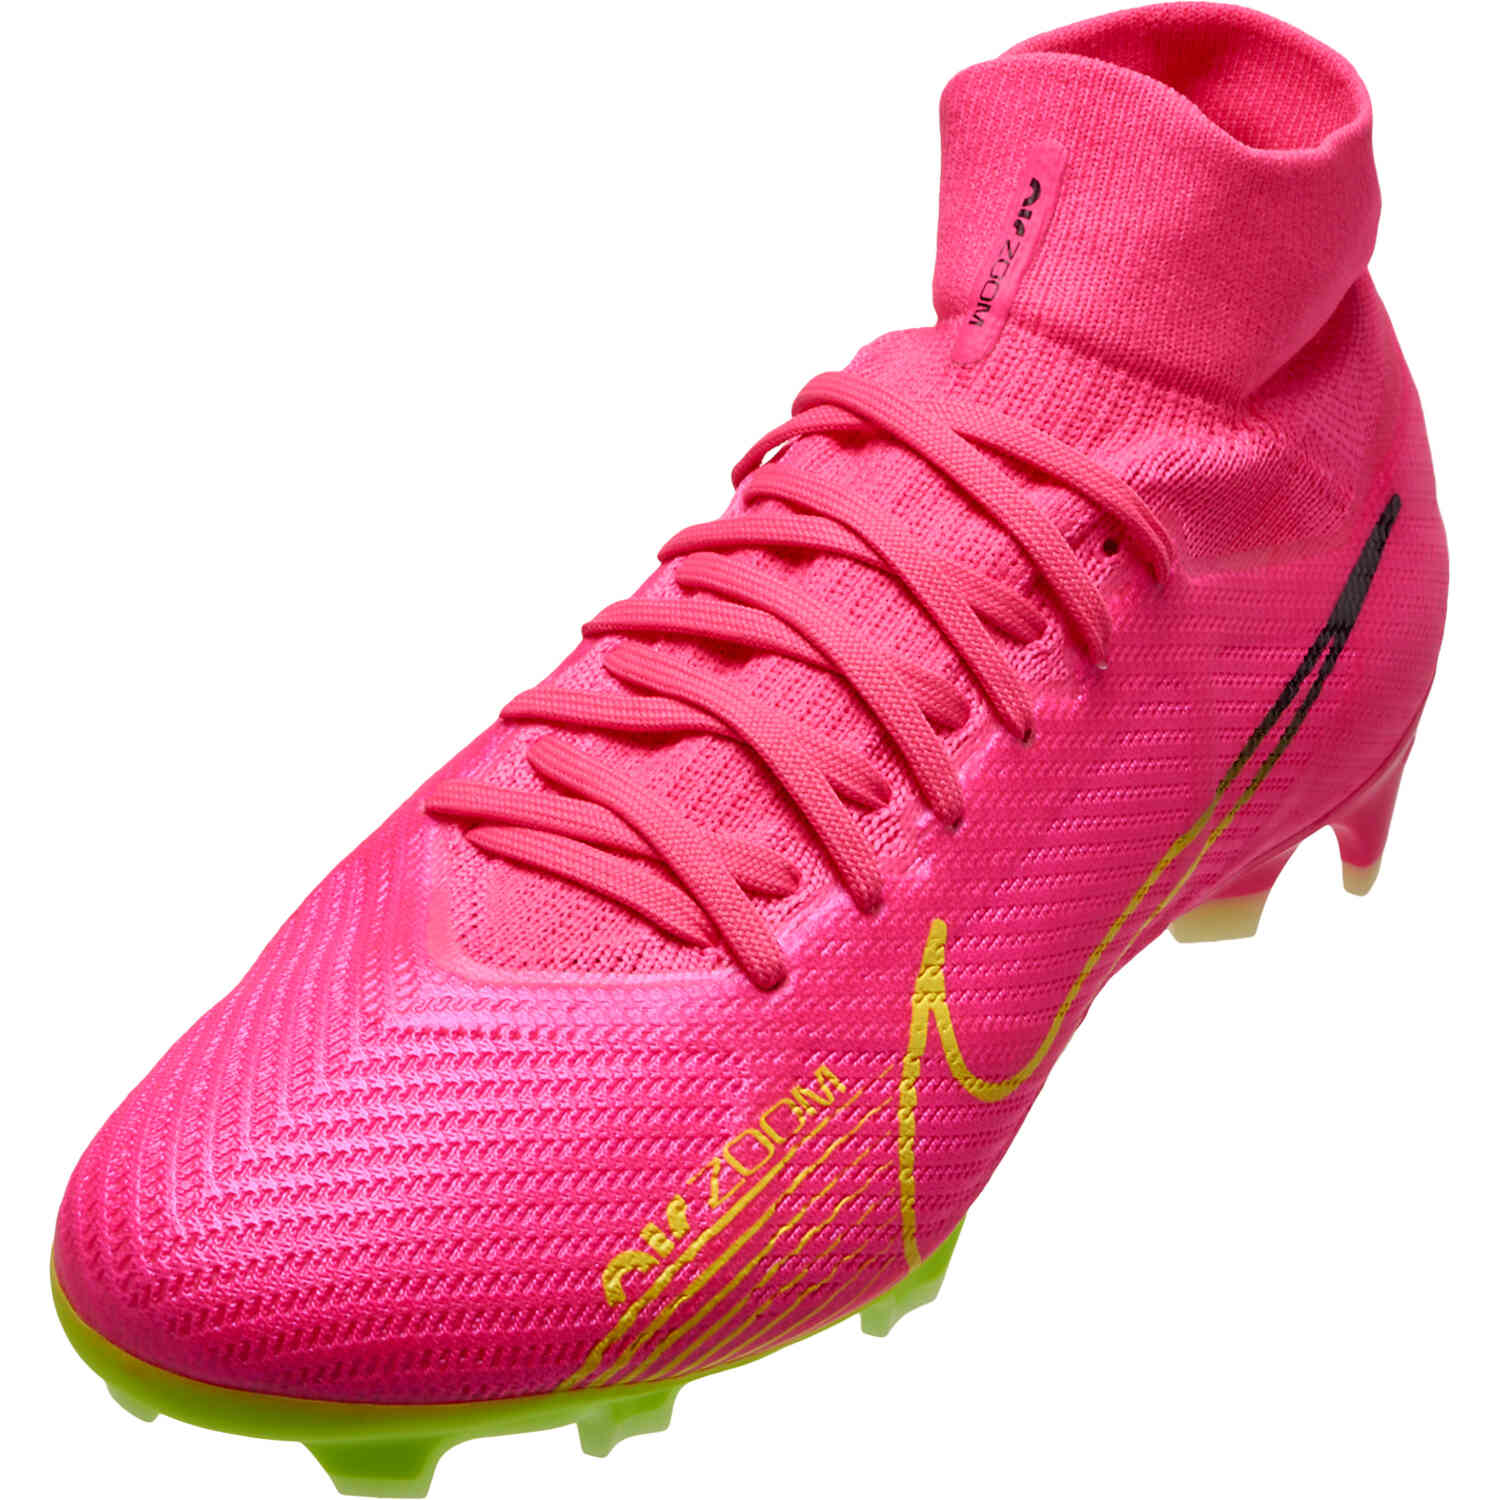 Nike Zoom Superfly 9 Pro FG Firm Ground Soccer Cleats - Pink Blast, Volt & Gridiron - Soccer Master